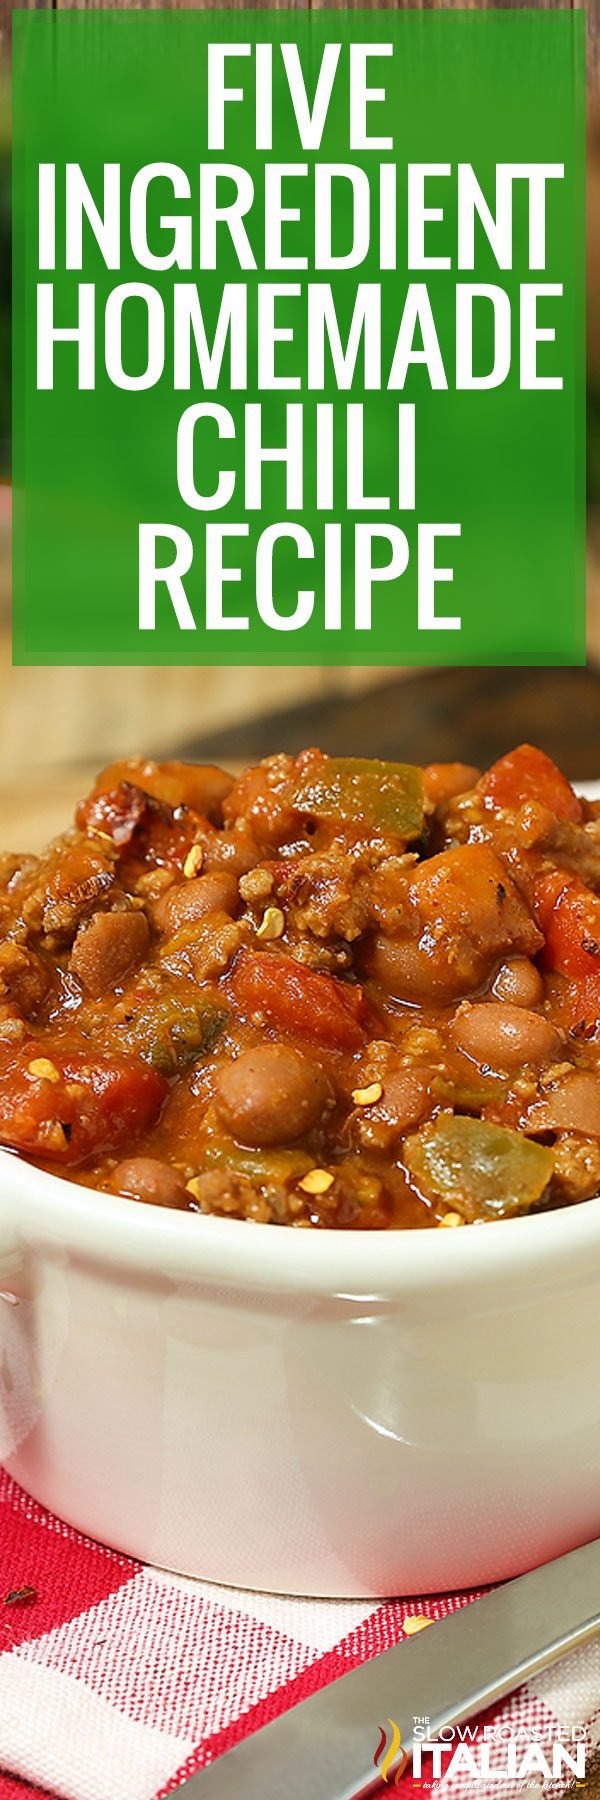 Title text (shown in a bowl): 5 Ingredient Homemade Chili Recipe